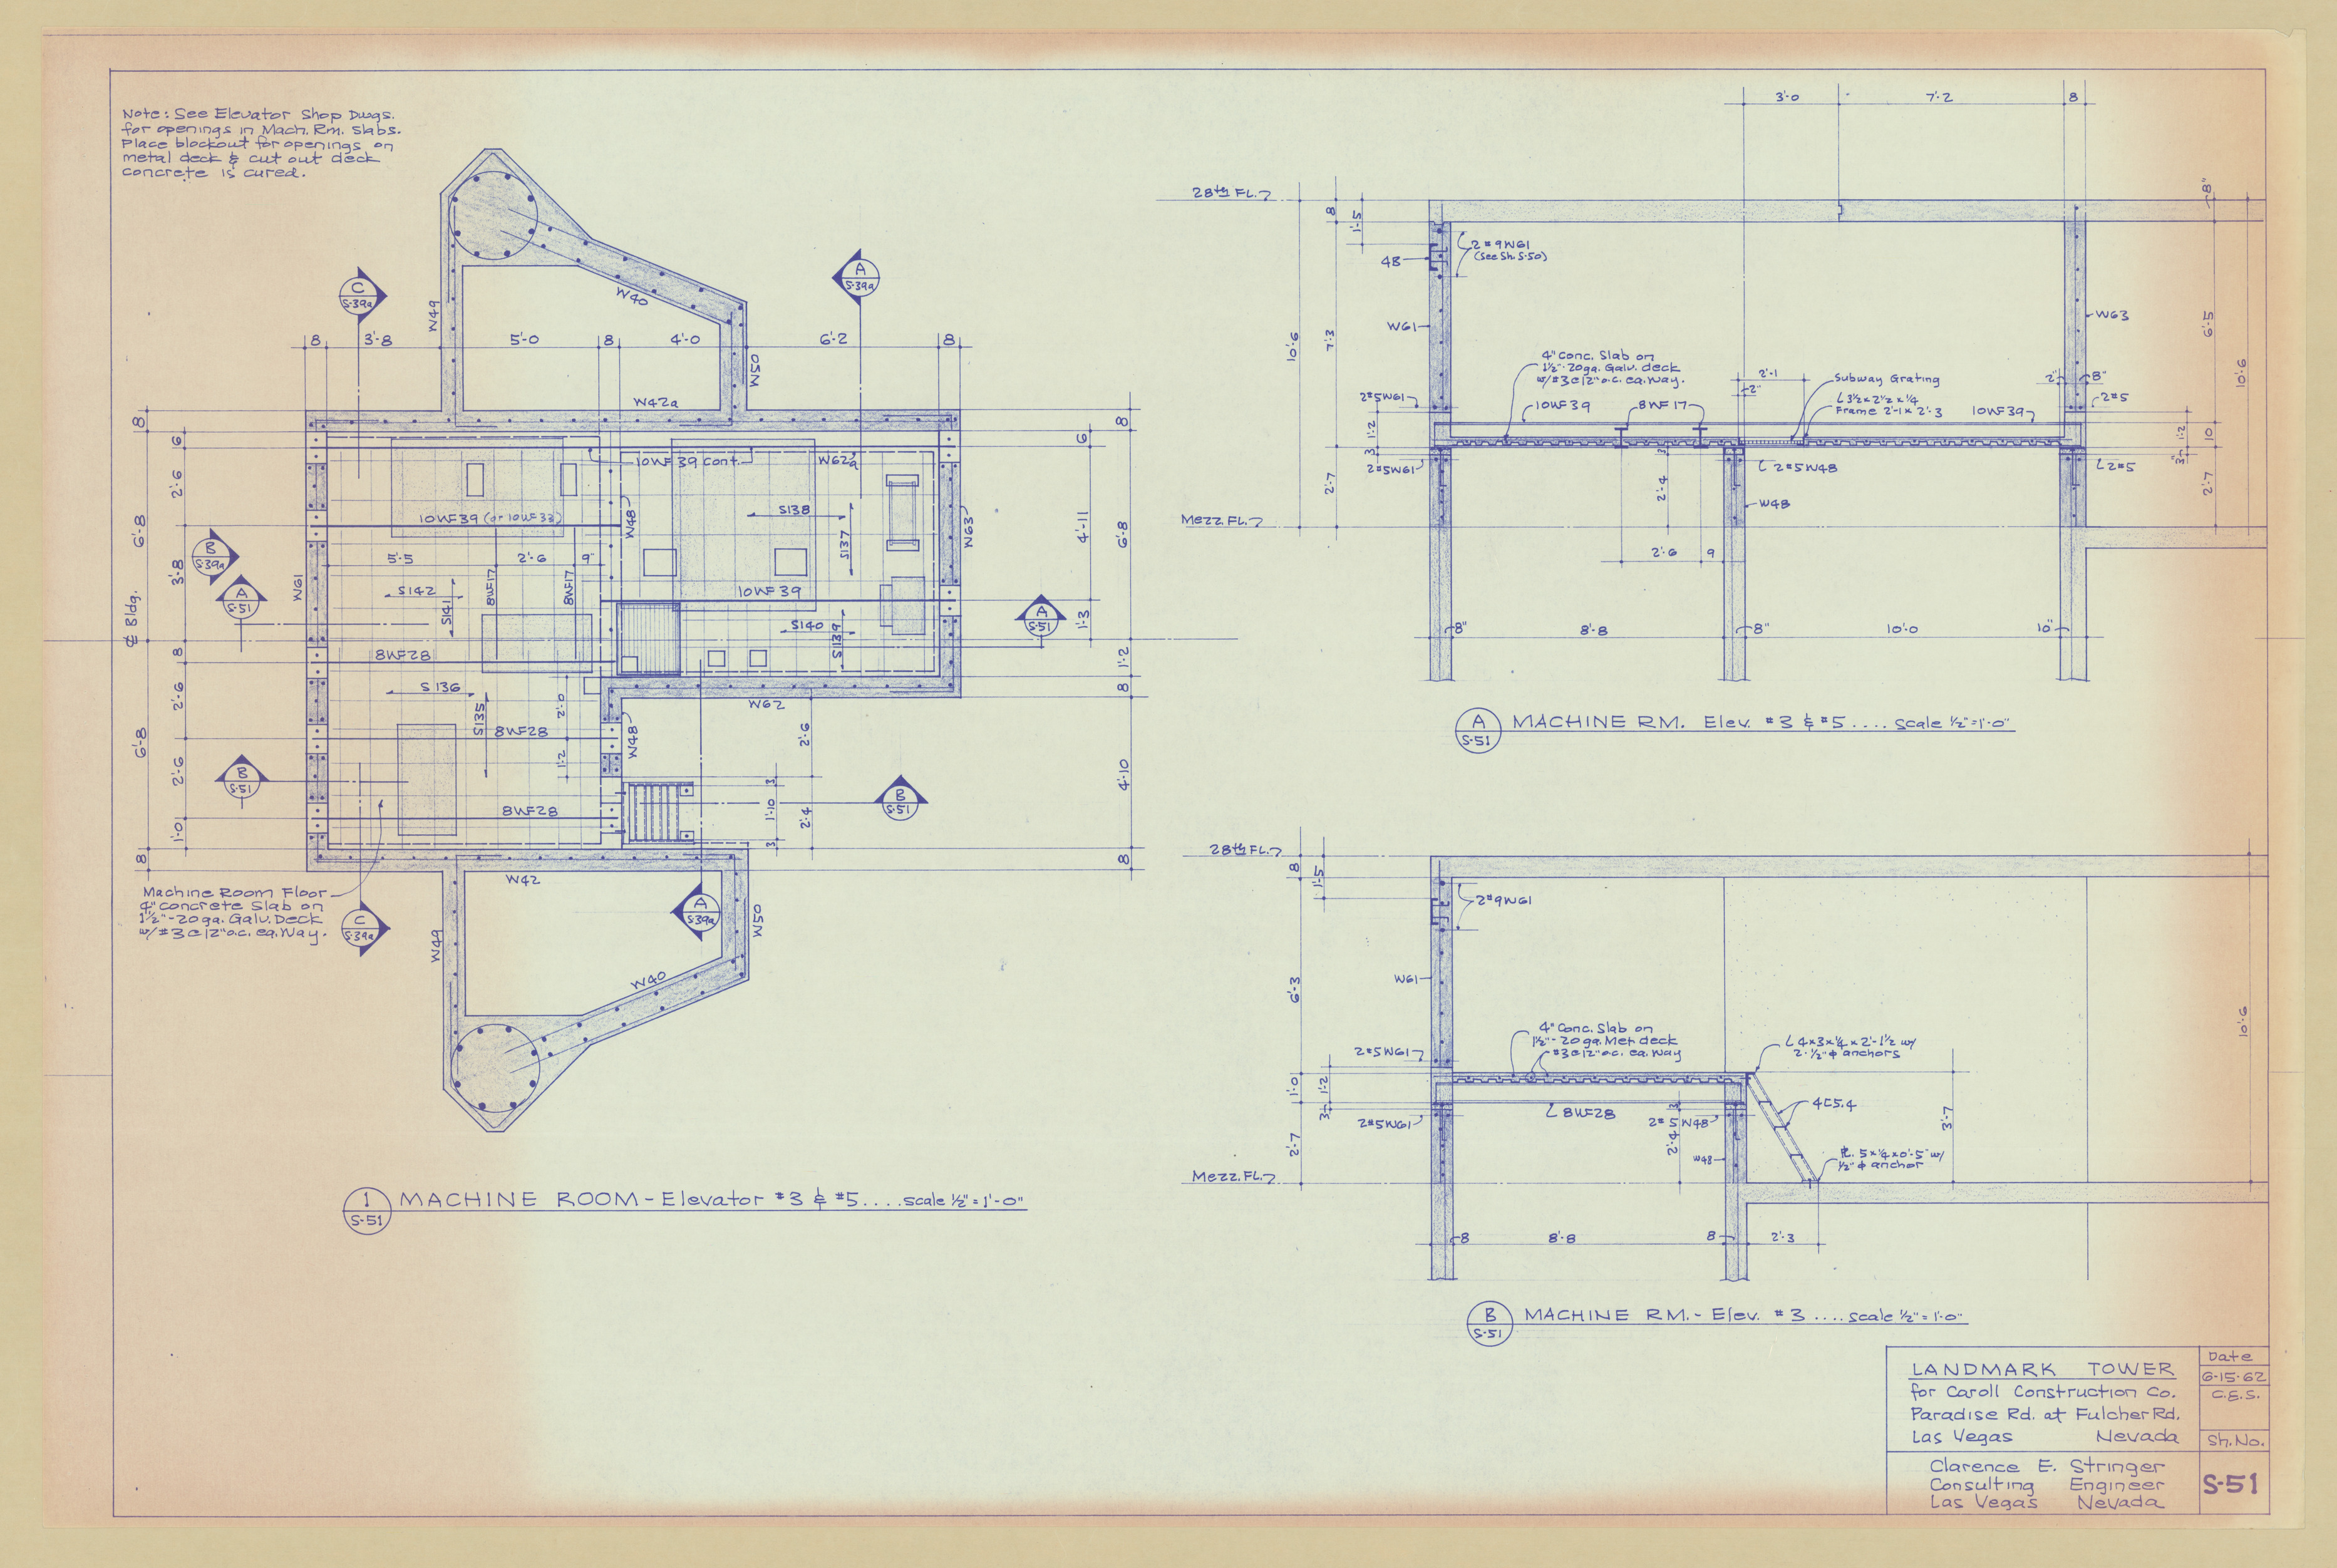 Original Landmark Tower structural drawings, sheets S1-S105: architectural drawings, image 042